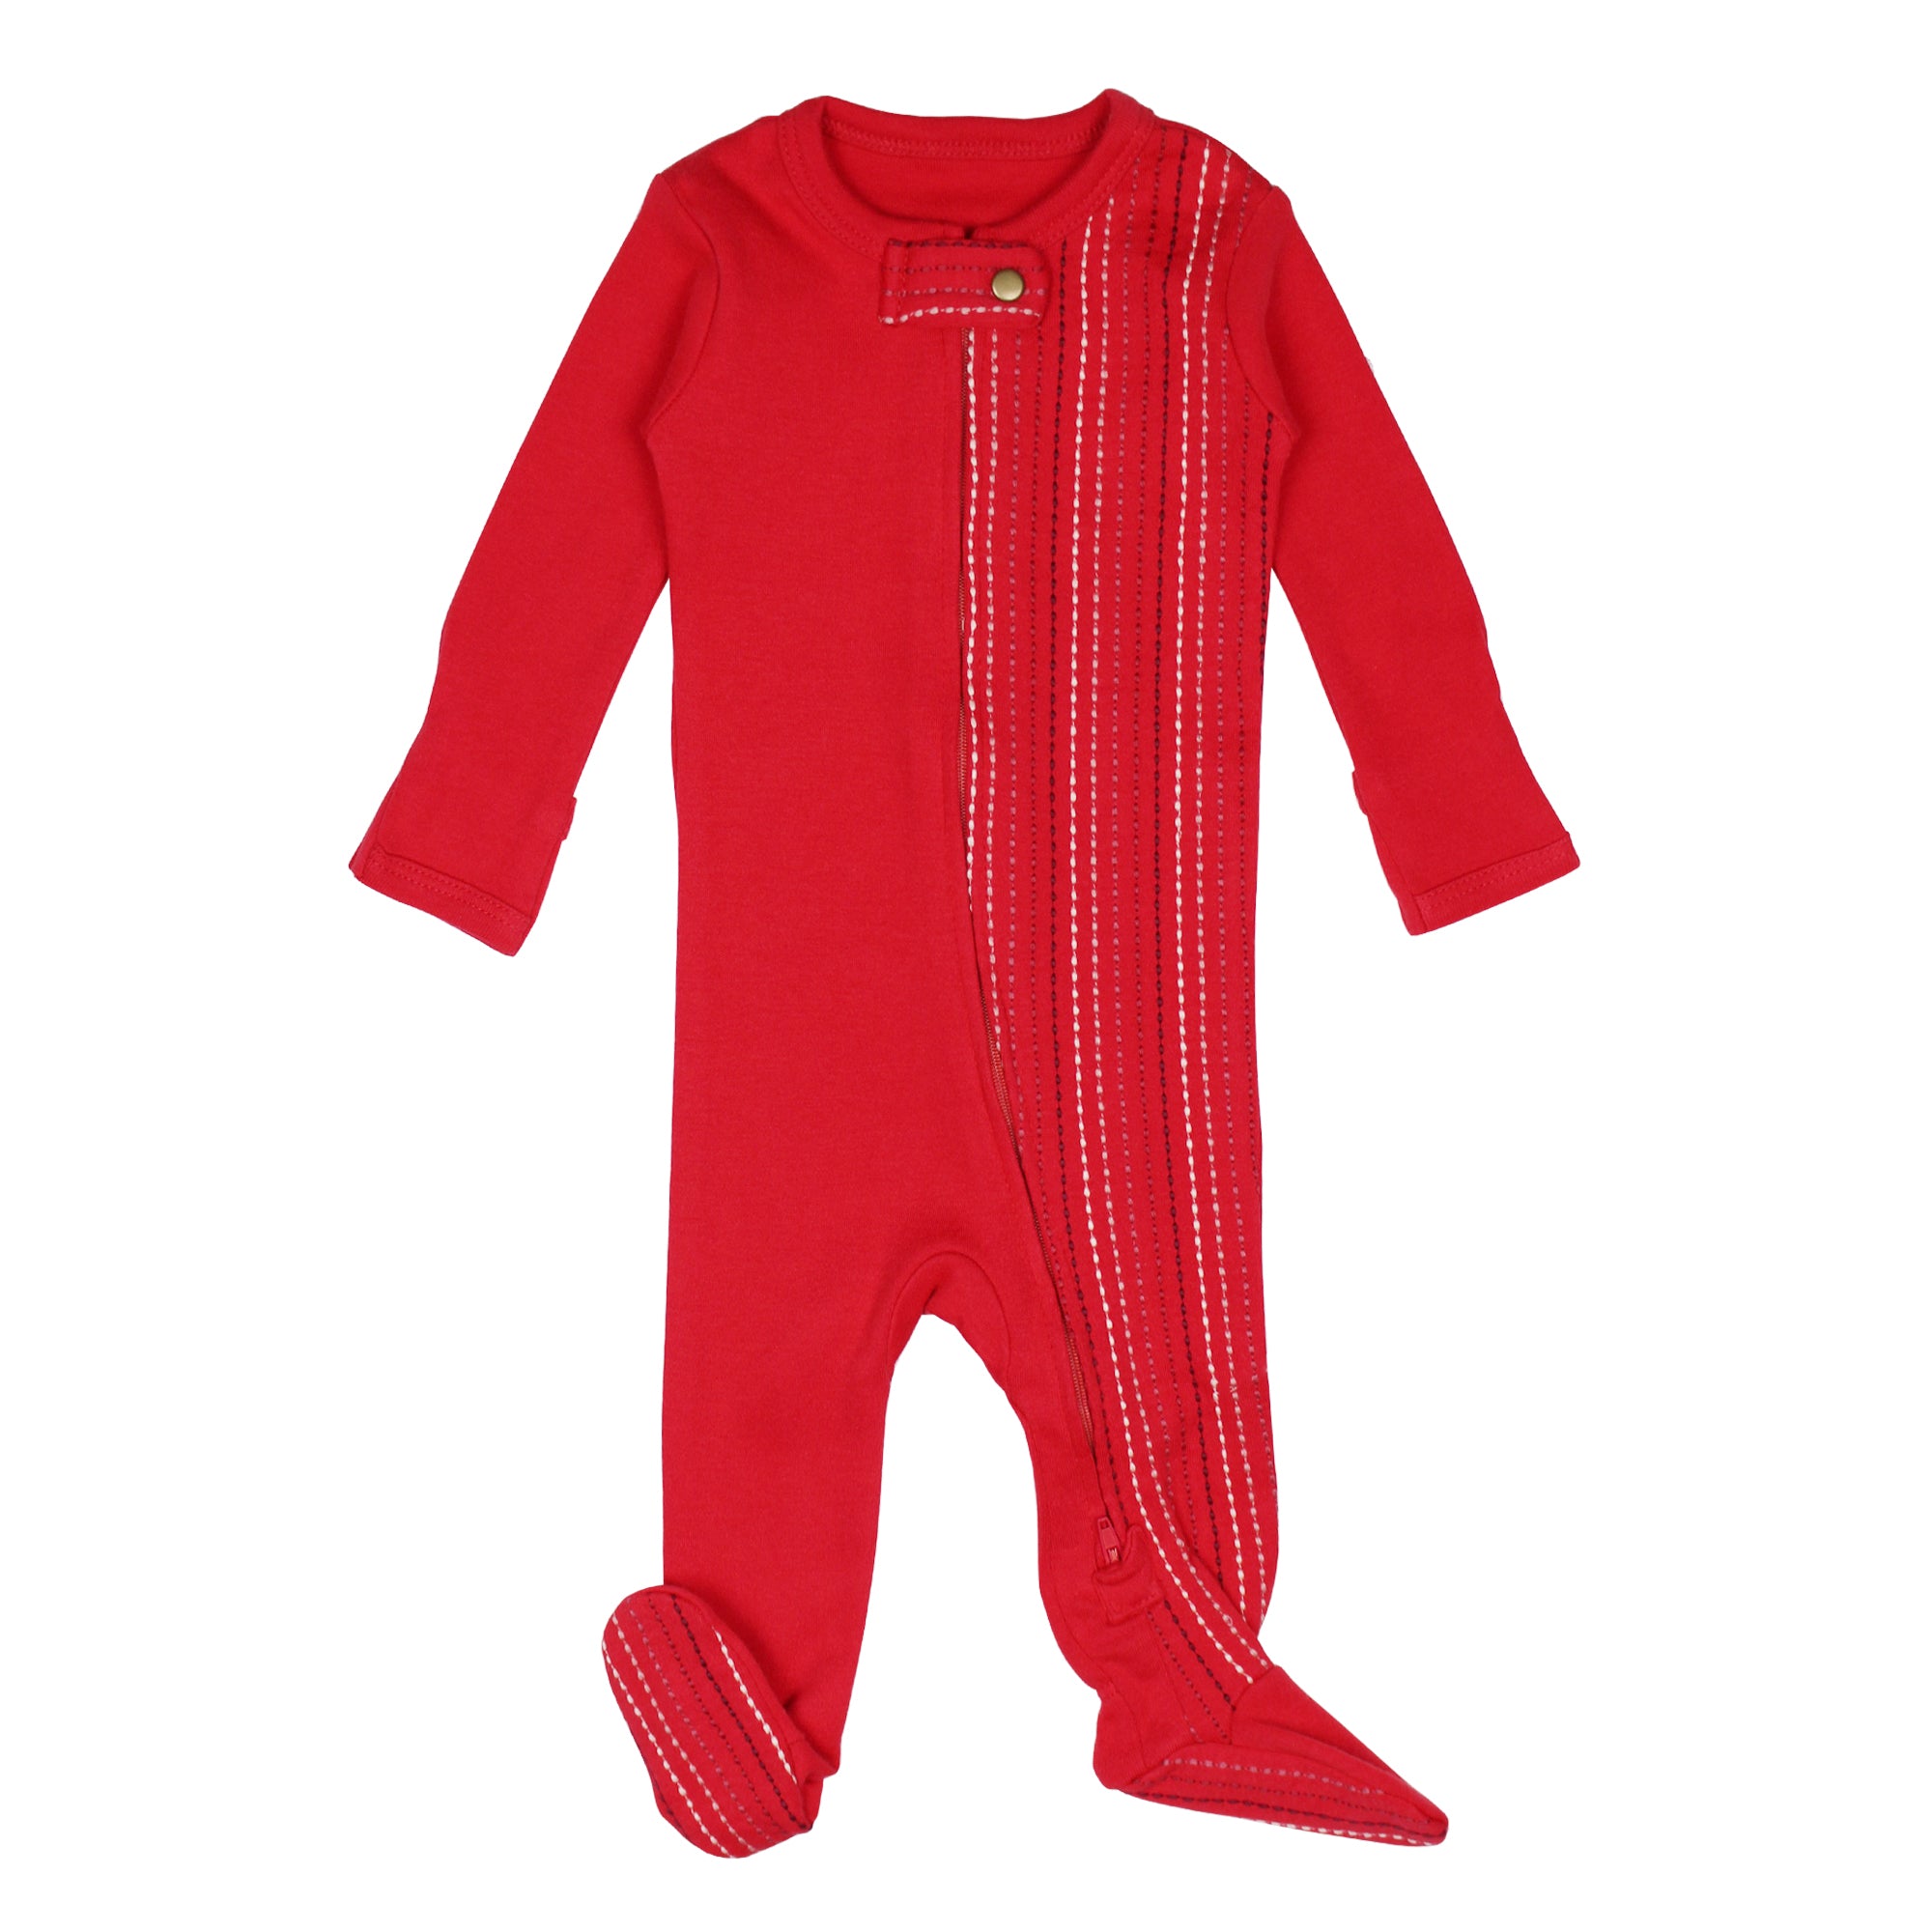 L'ovedbaby Embroidered Zipper Footie